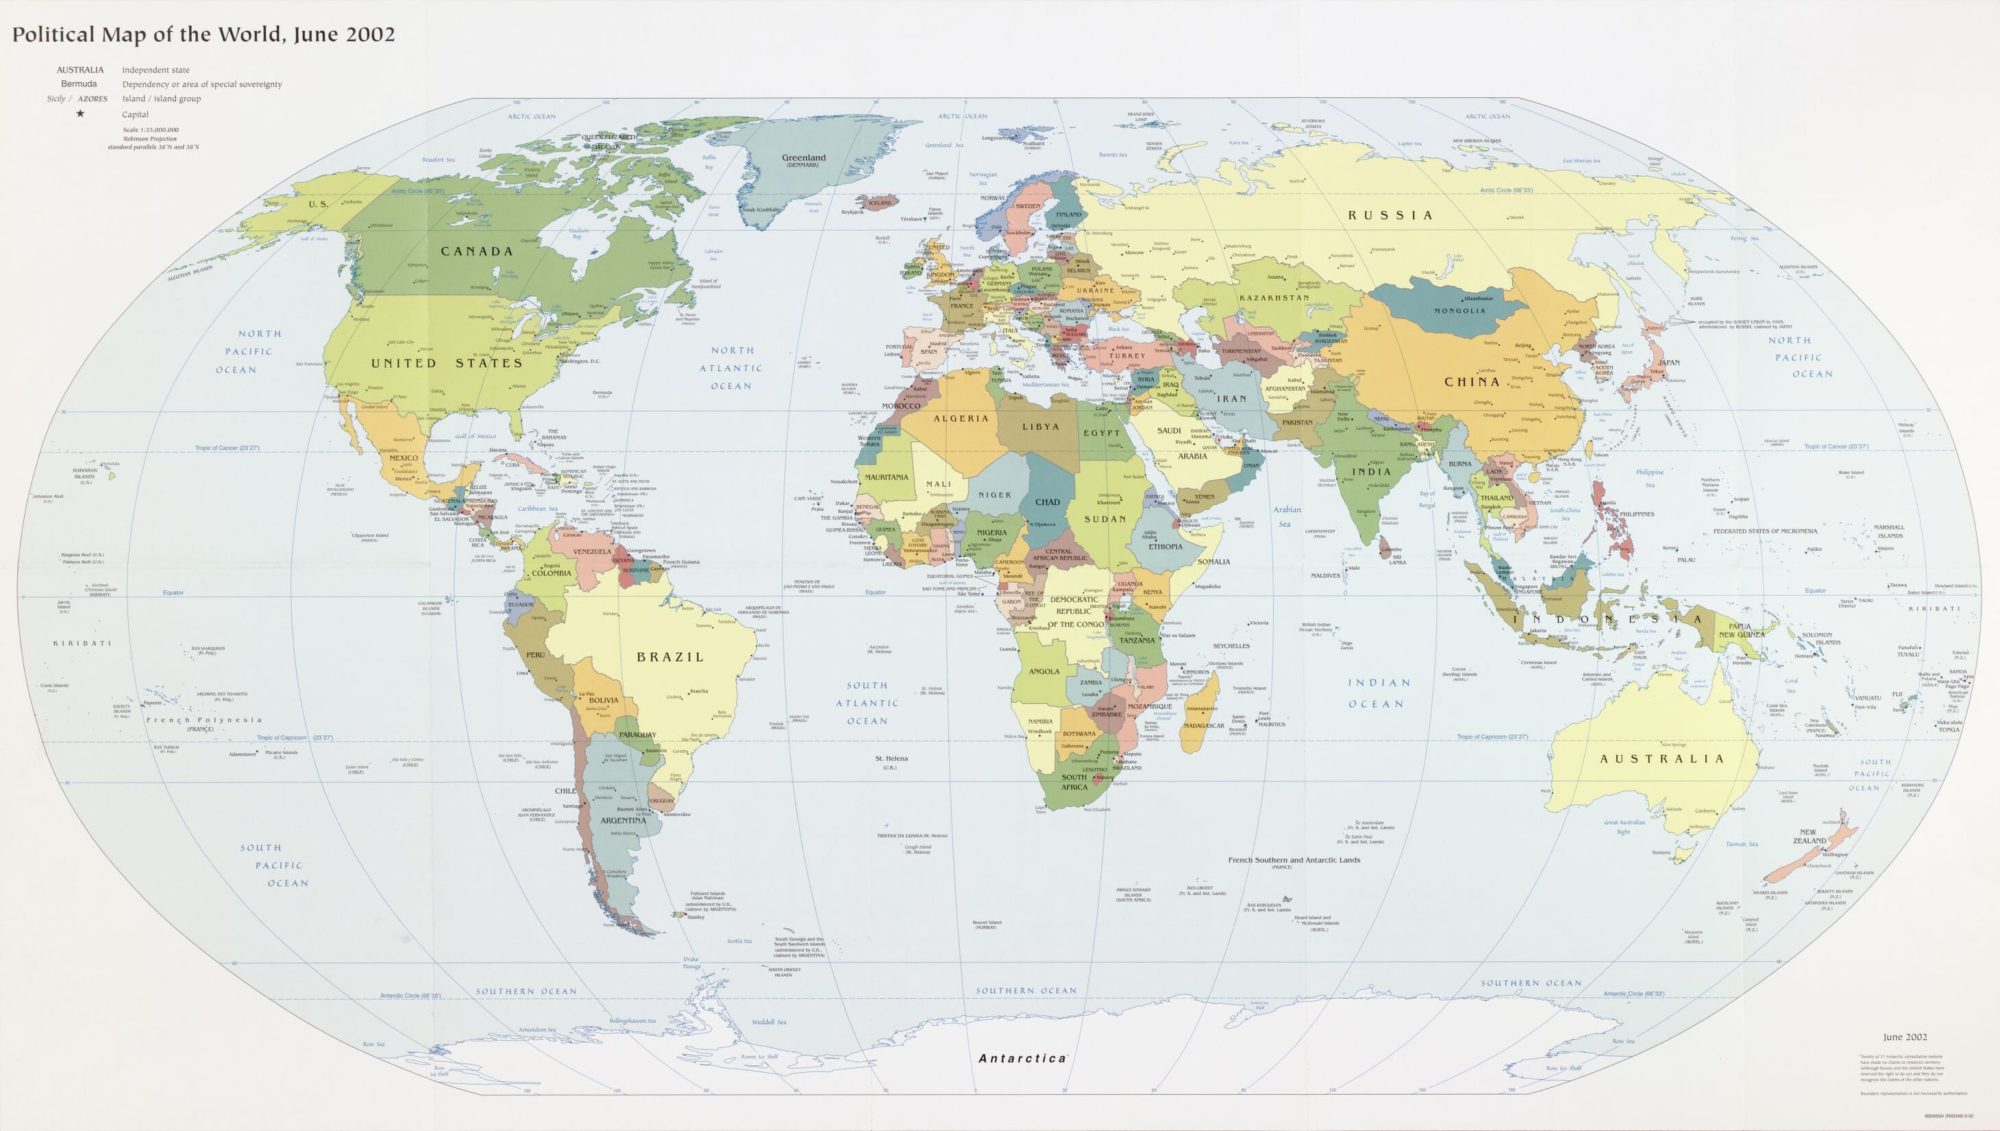 The World Political Map  | June 2002 | Large, Printable Downloadable Map